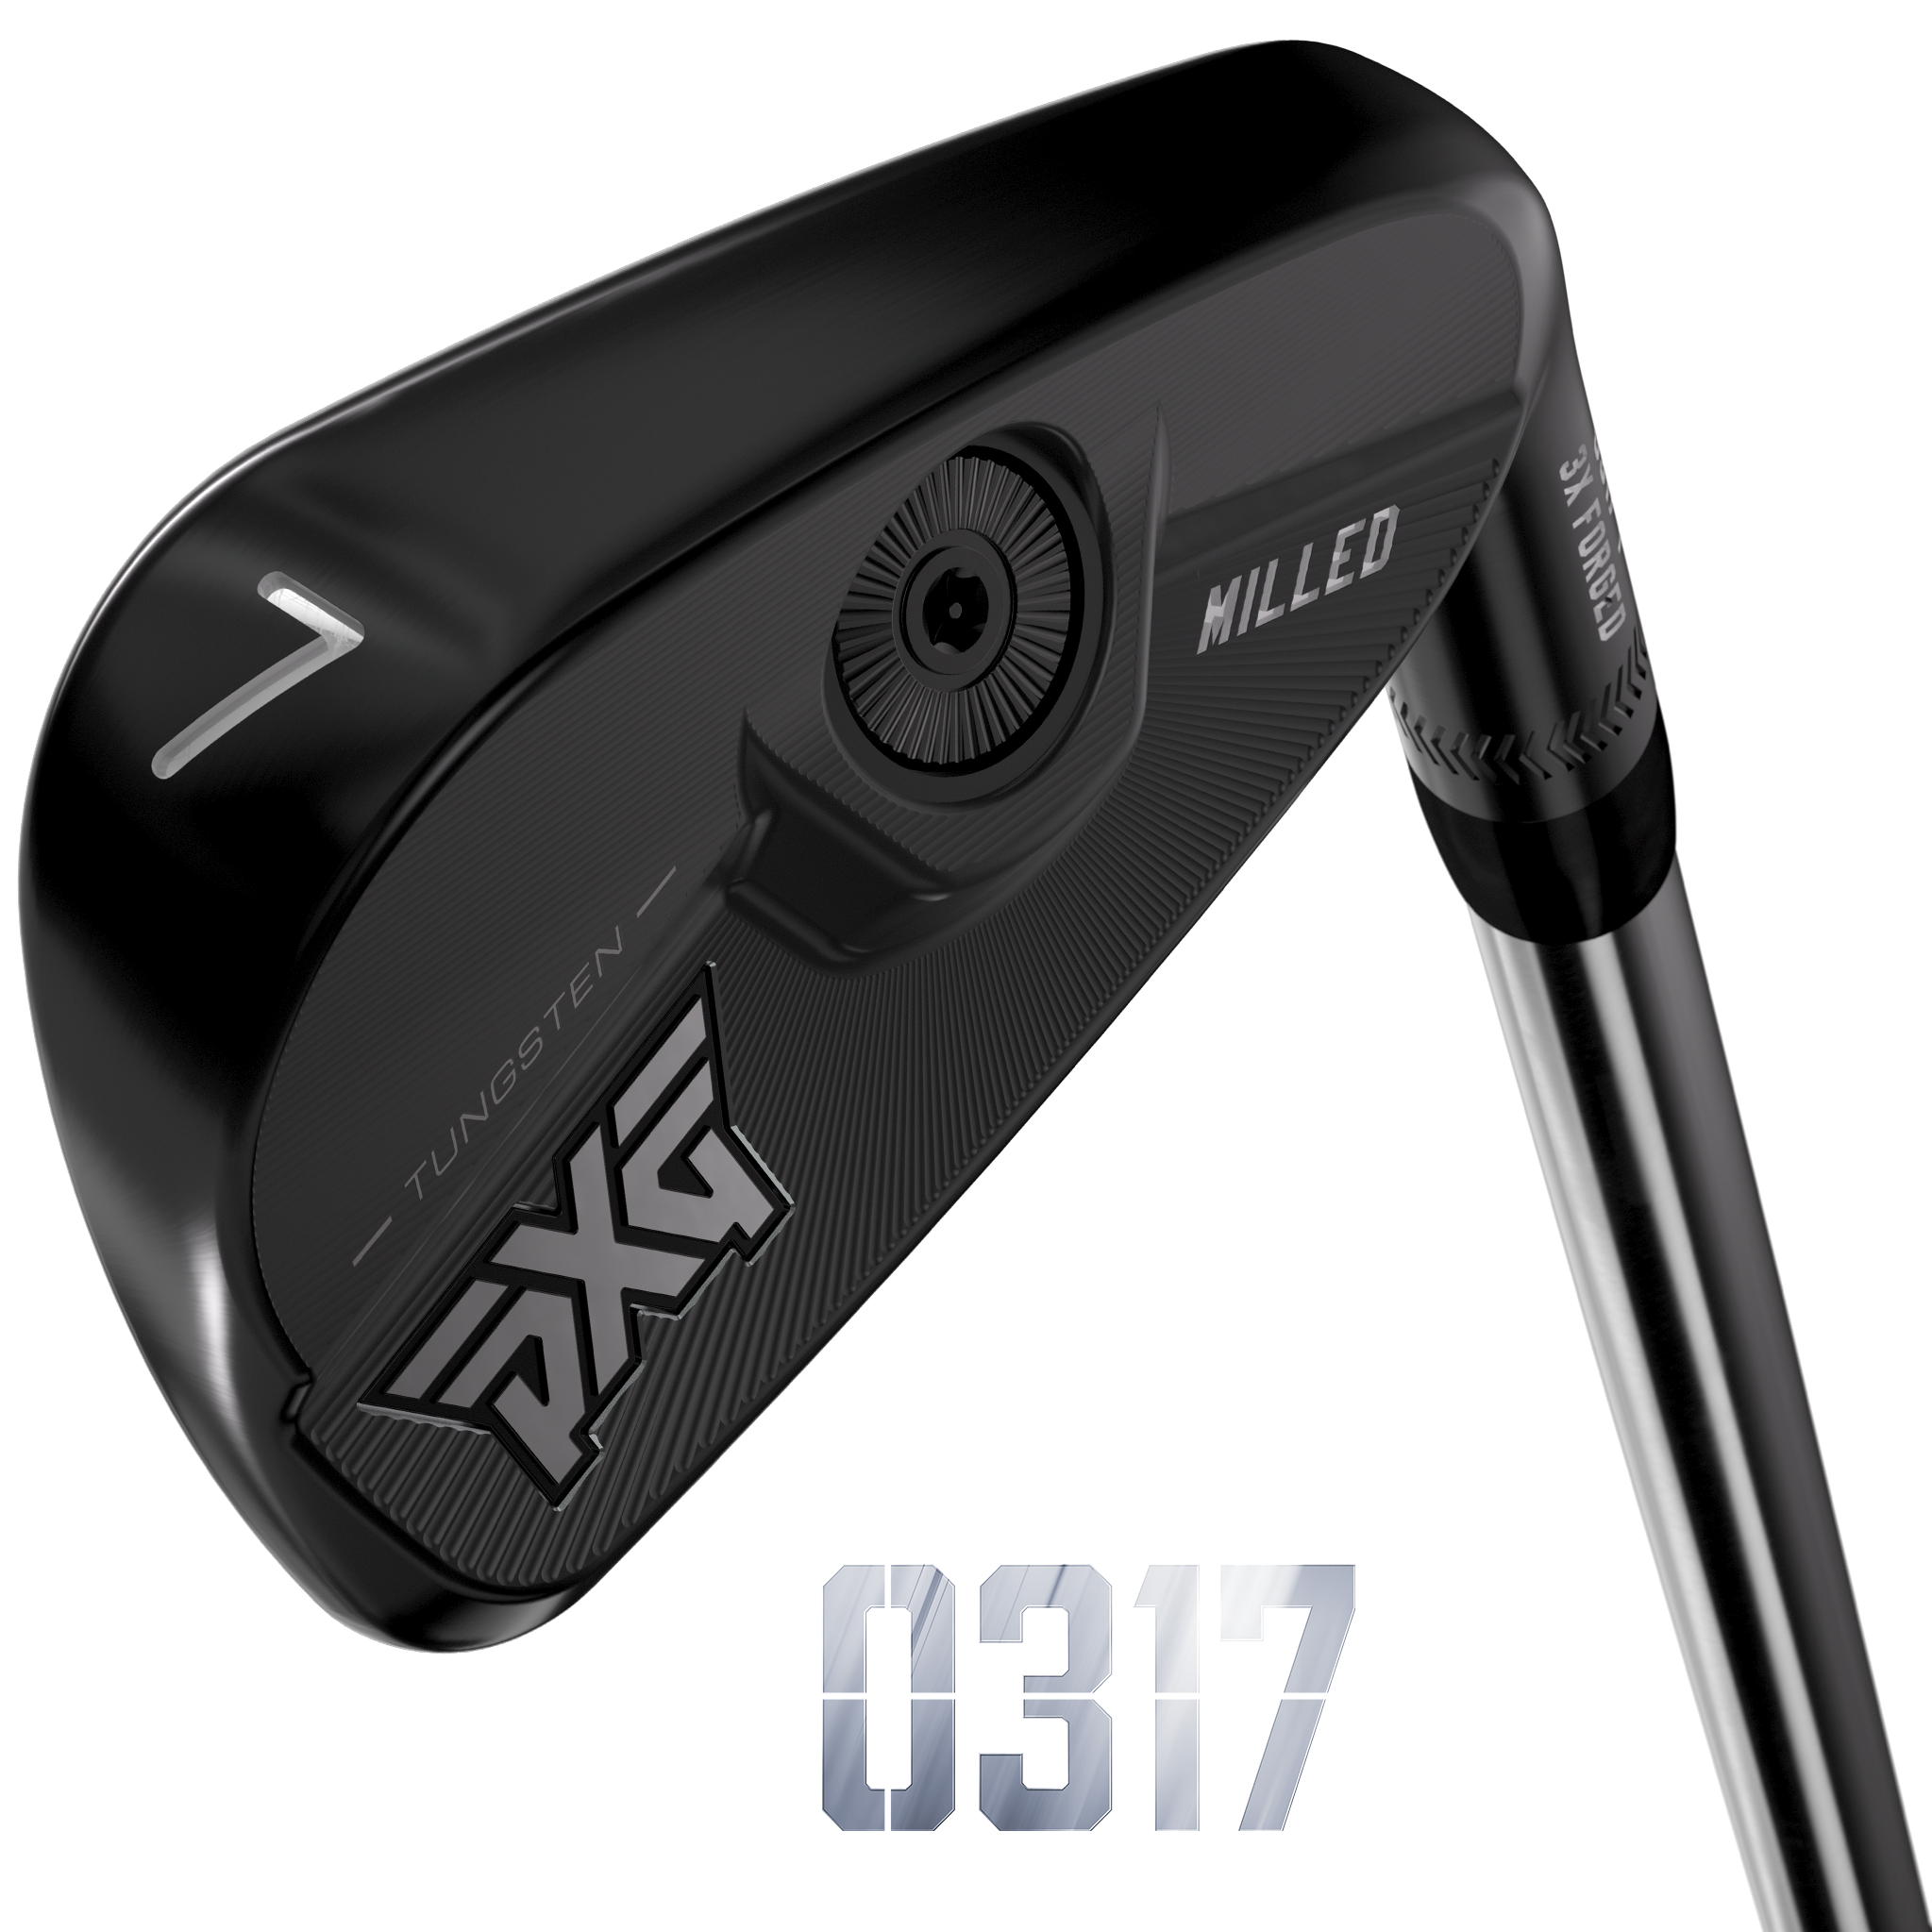 All-New 0317 T Players Irons | PXG Cavity Back Irons